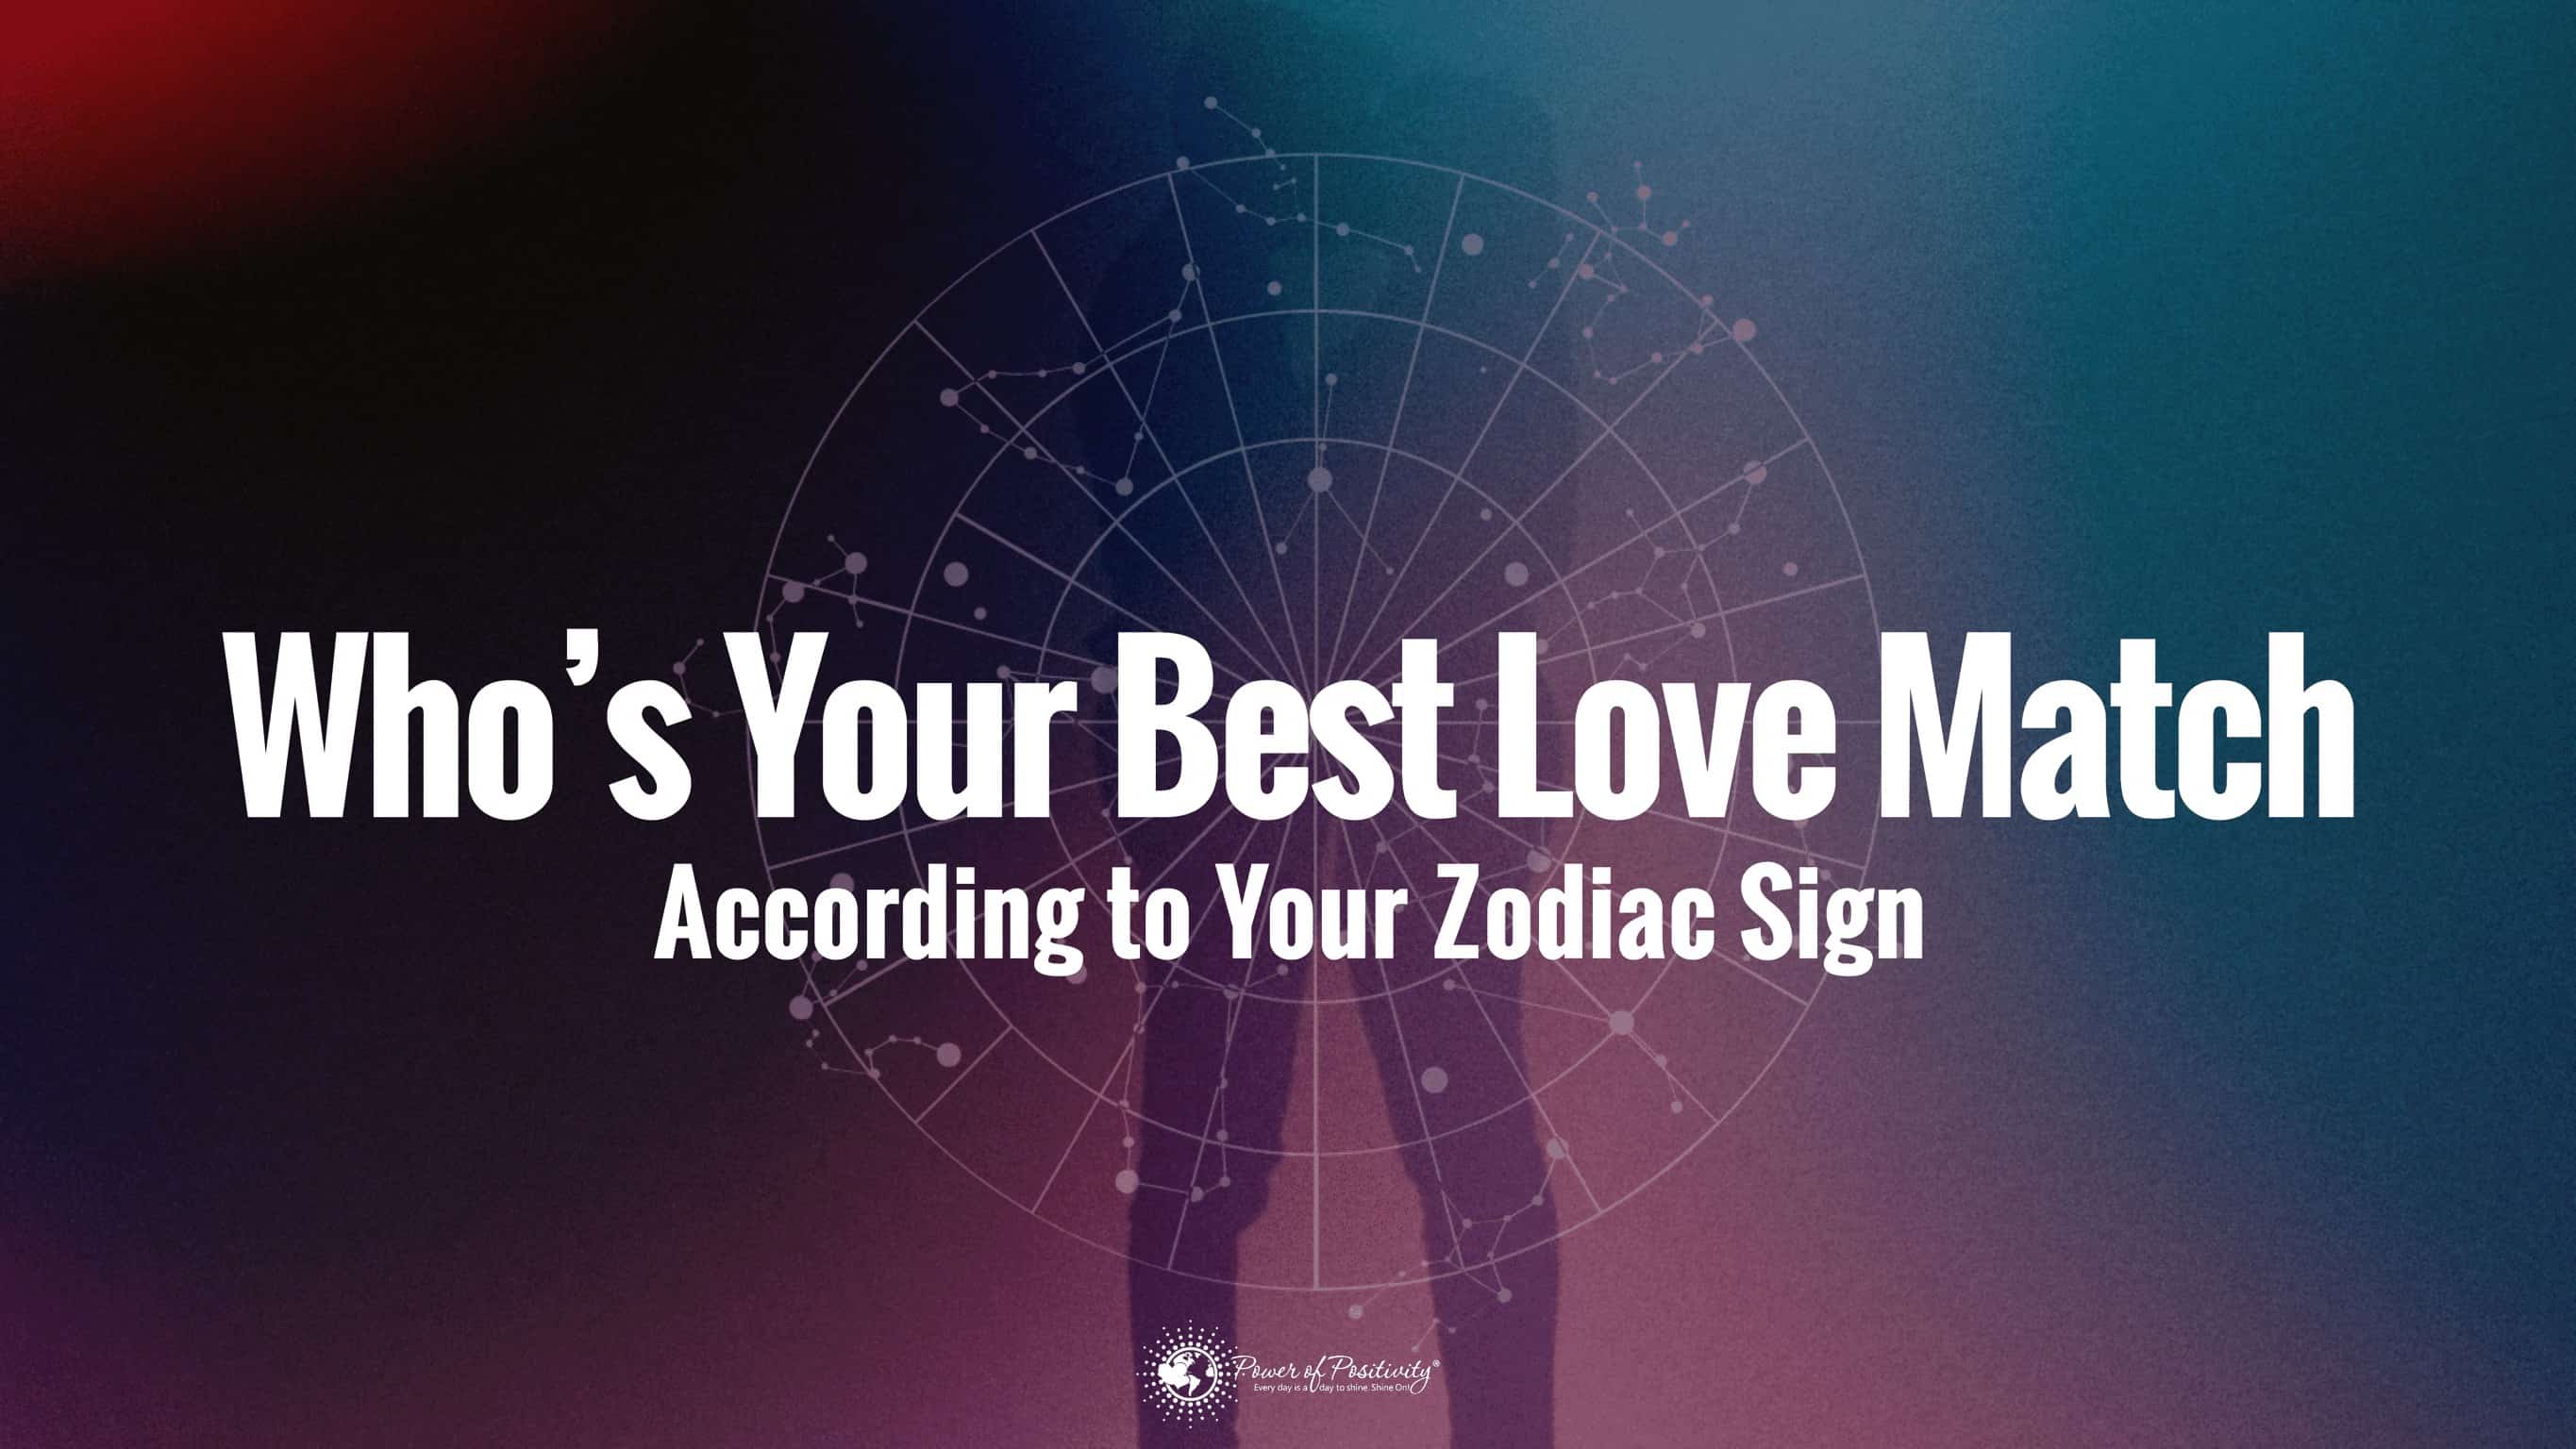 Who’s Your Best Love Match, According to Zodiac Sign?